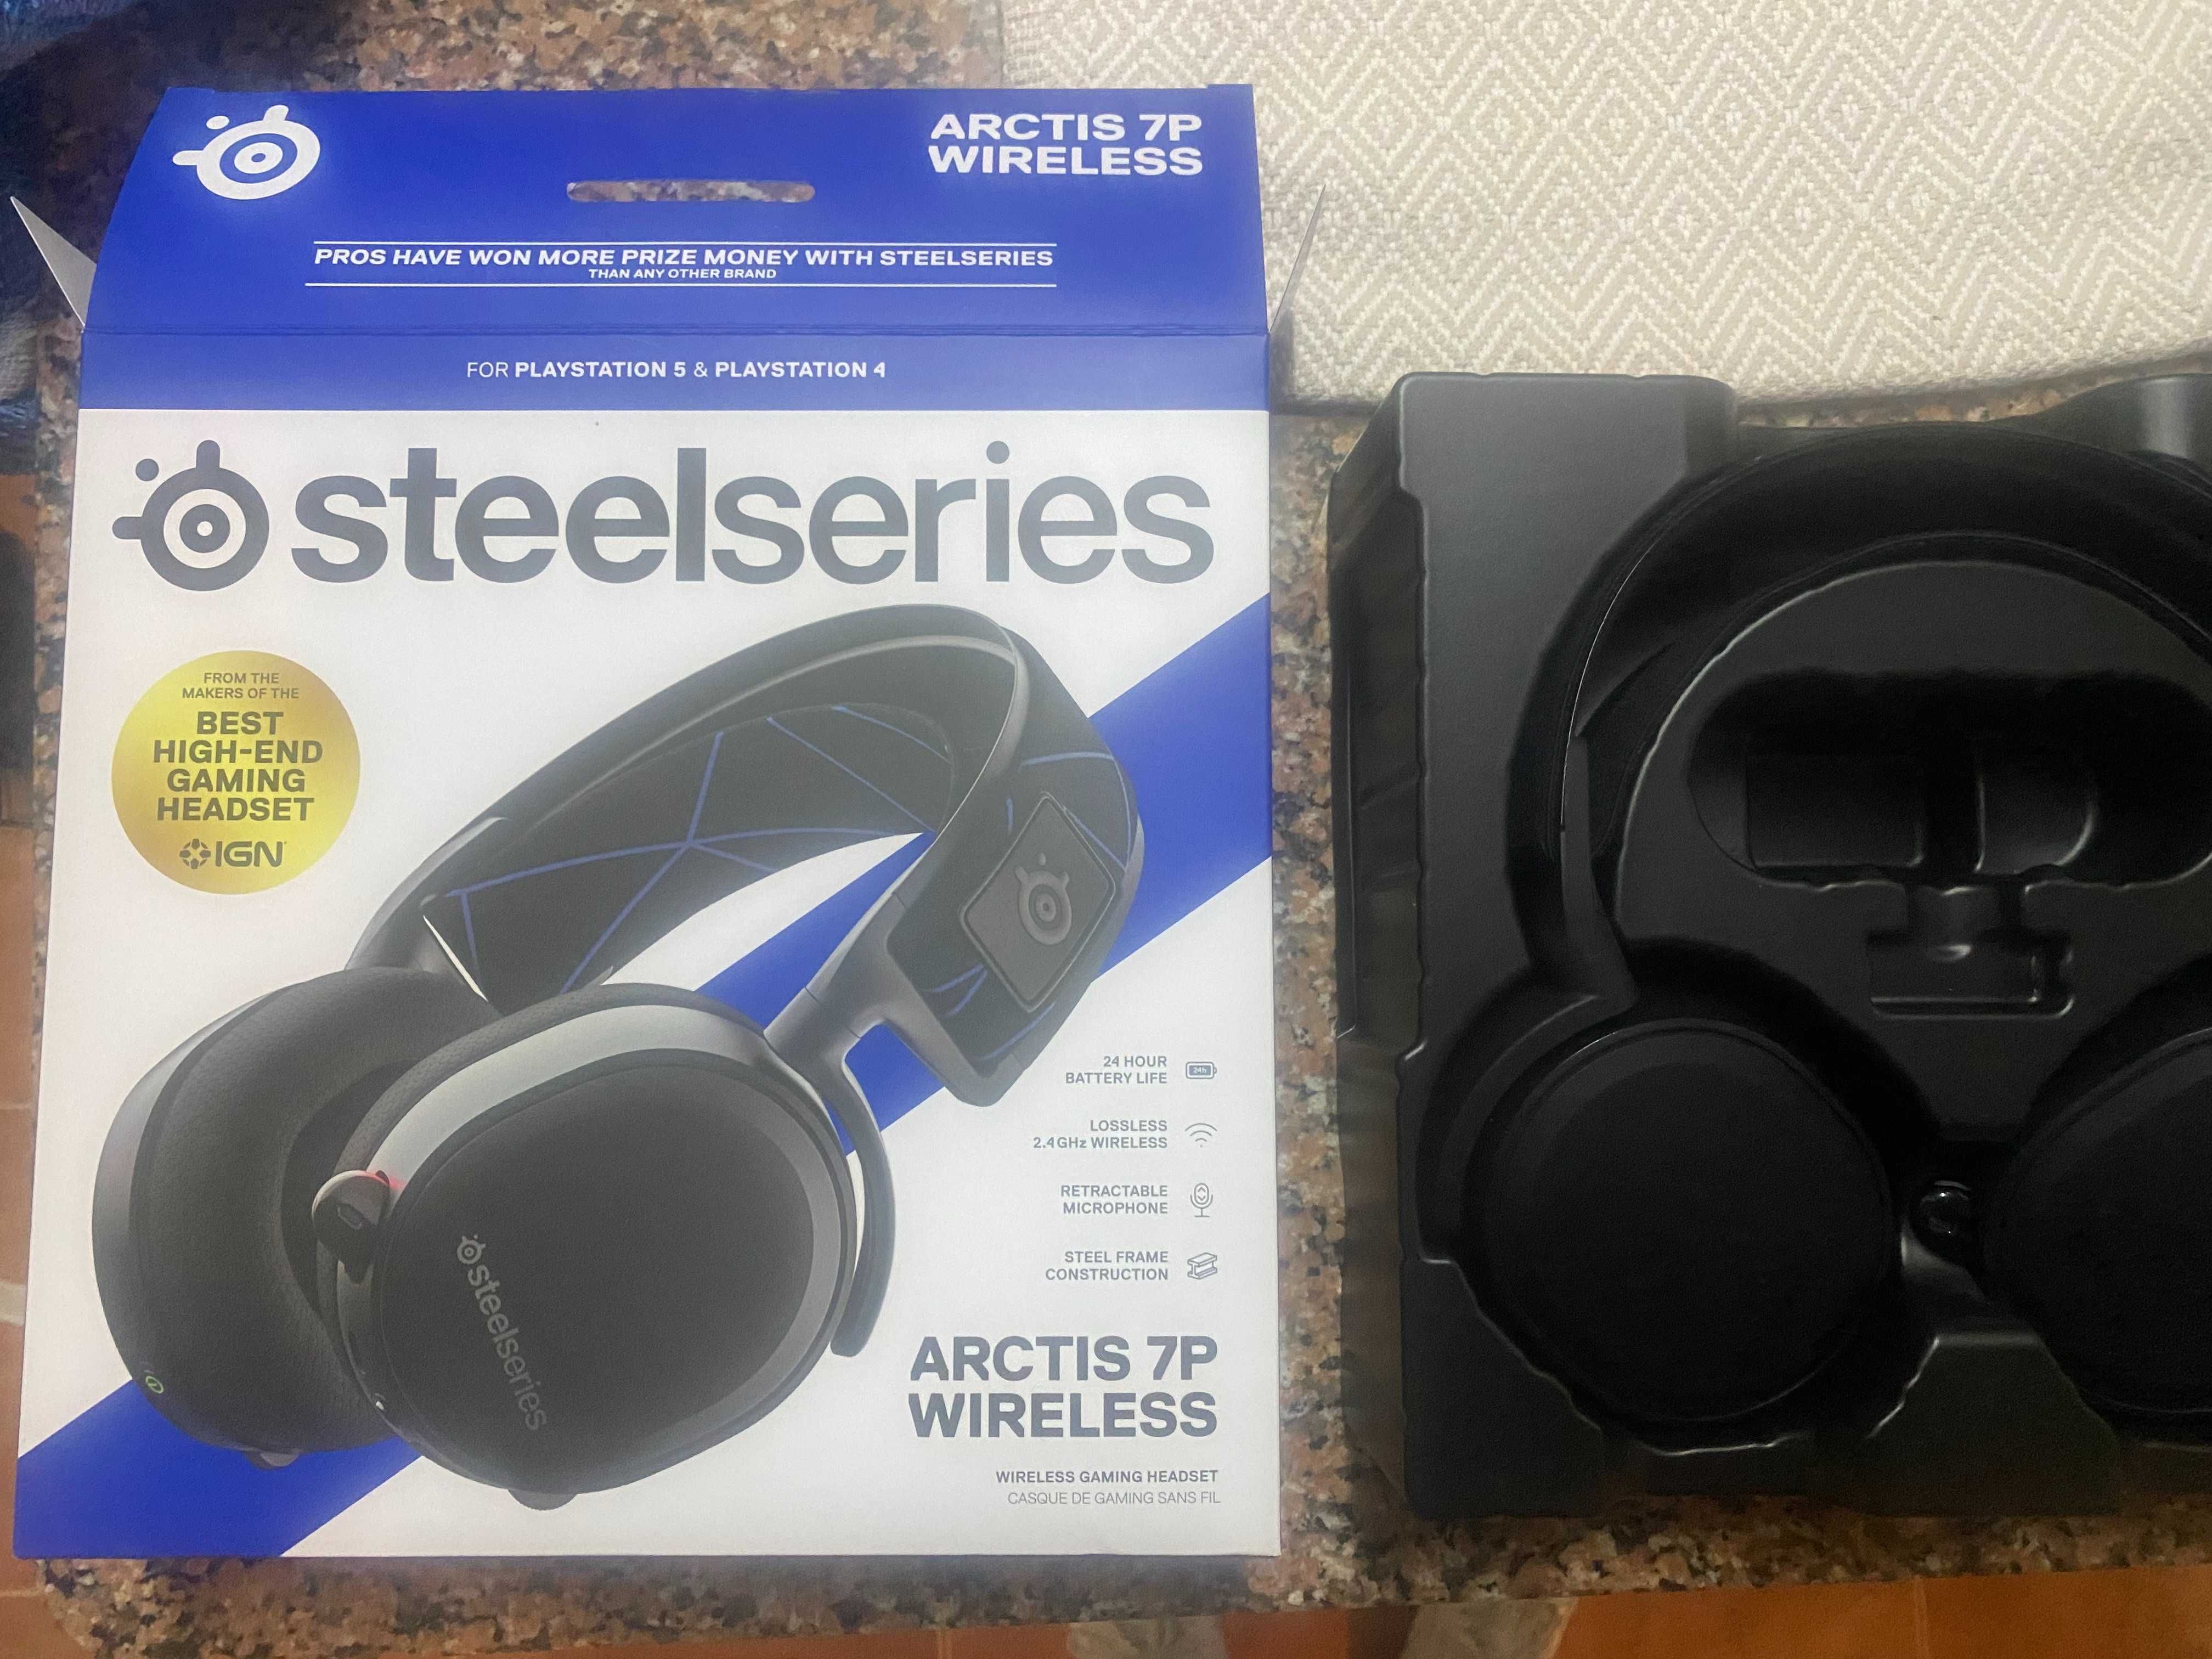 ARCTIS 7P
Wireless Gaming Headset for PlayStation